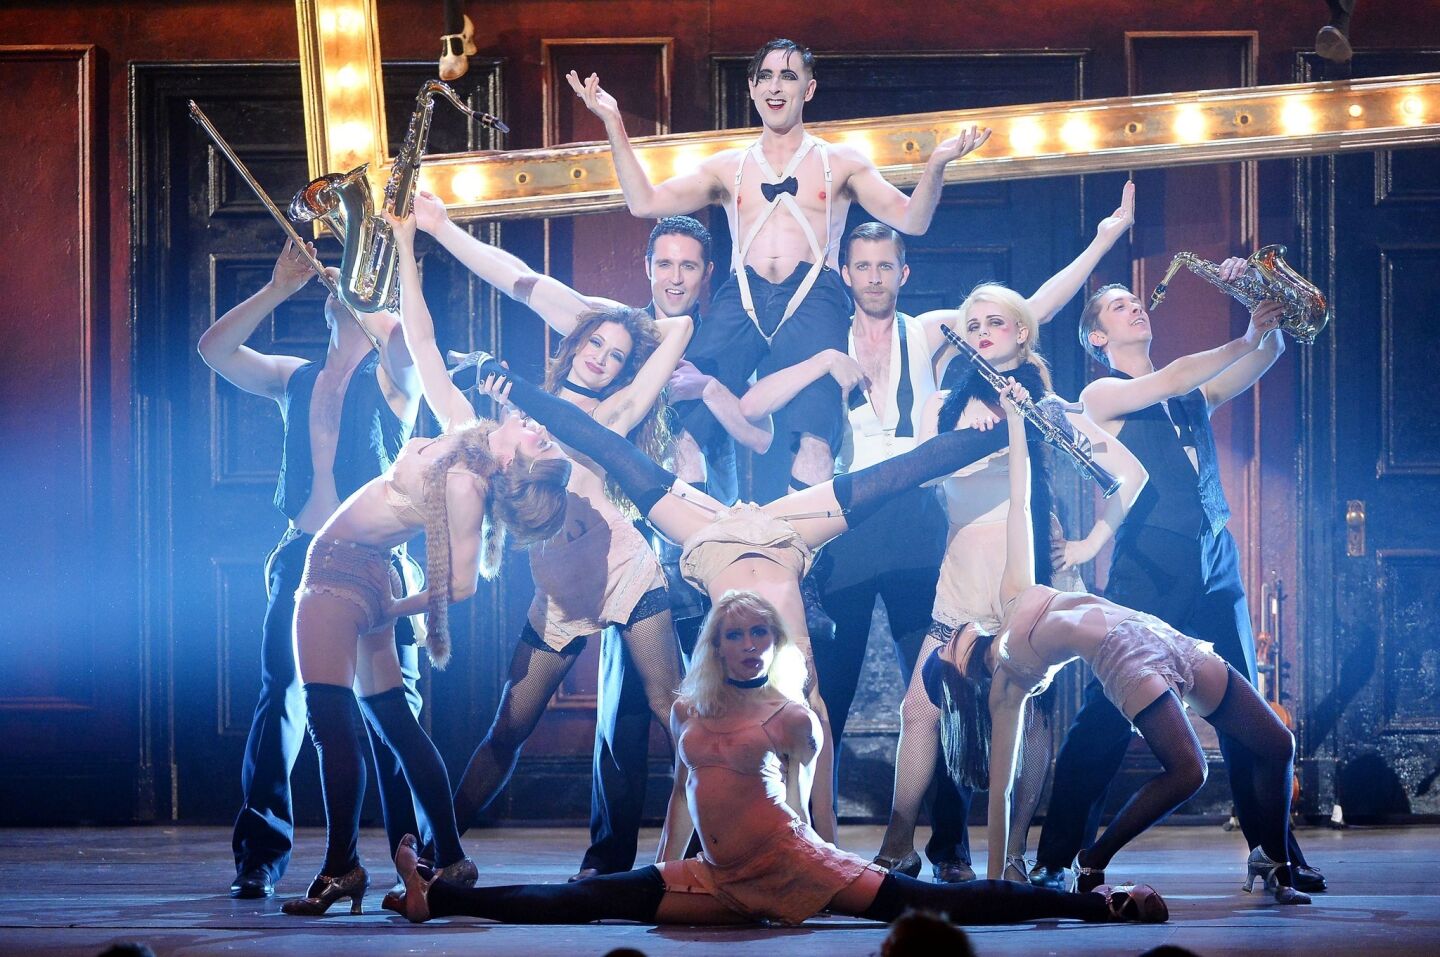 Alan Cumming and the cast of "Cabaret" perform onstage.